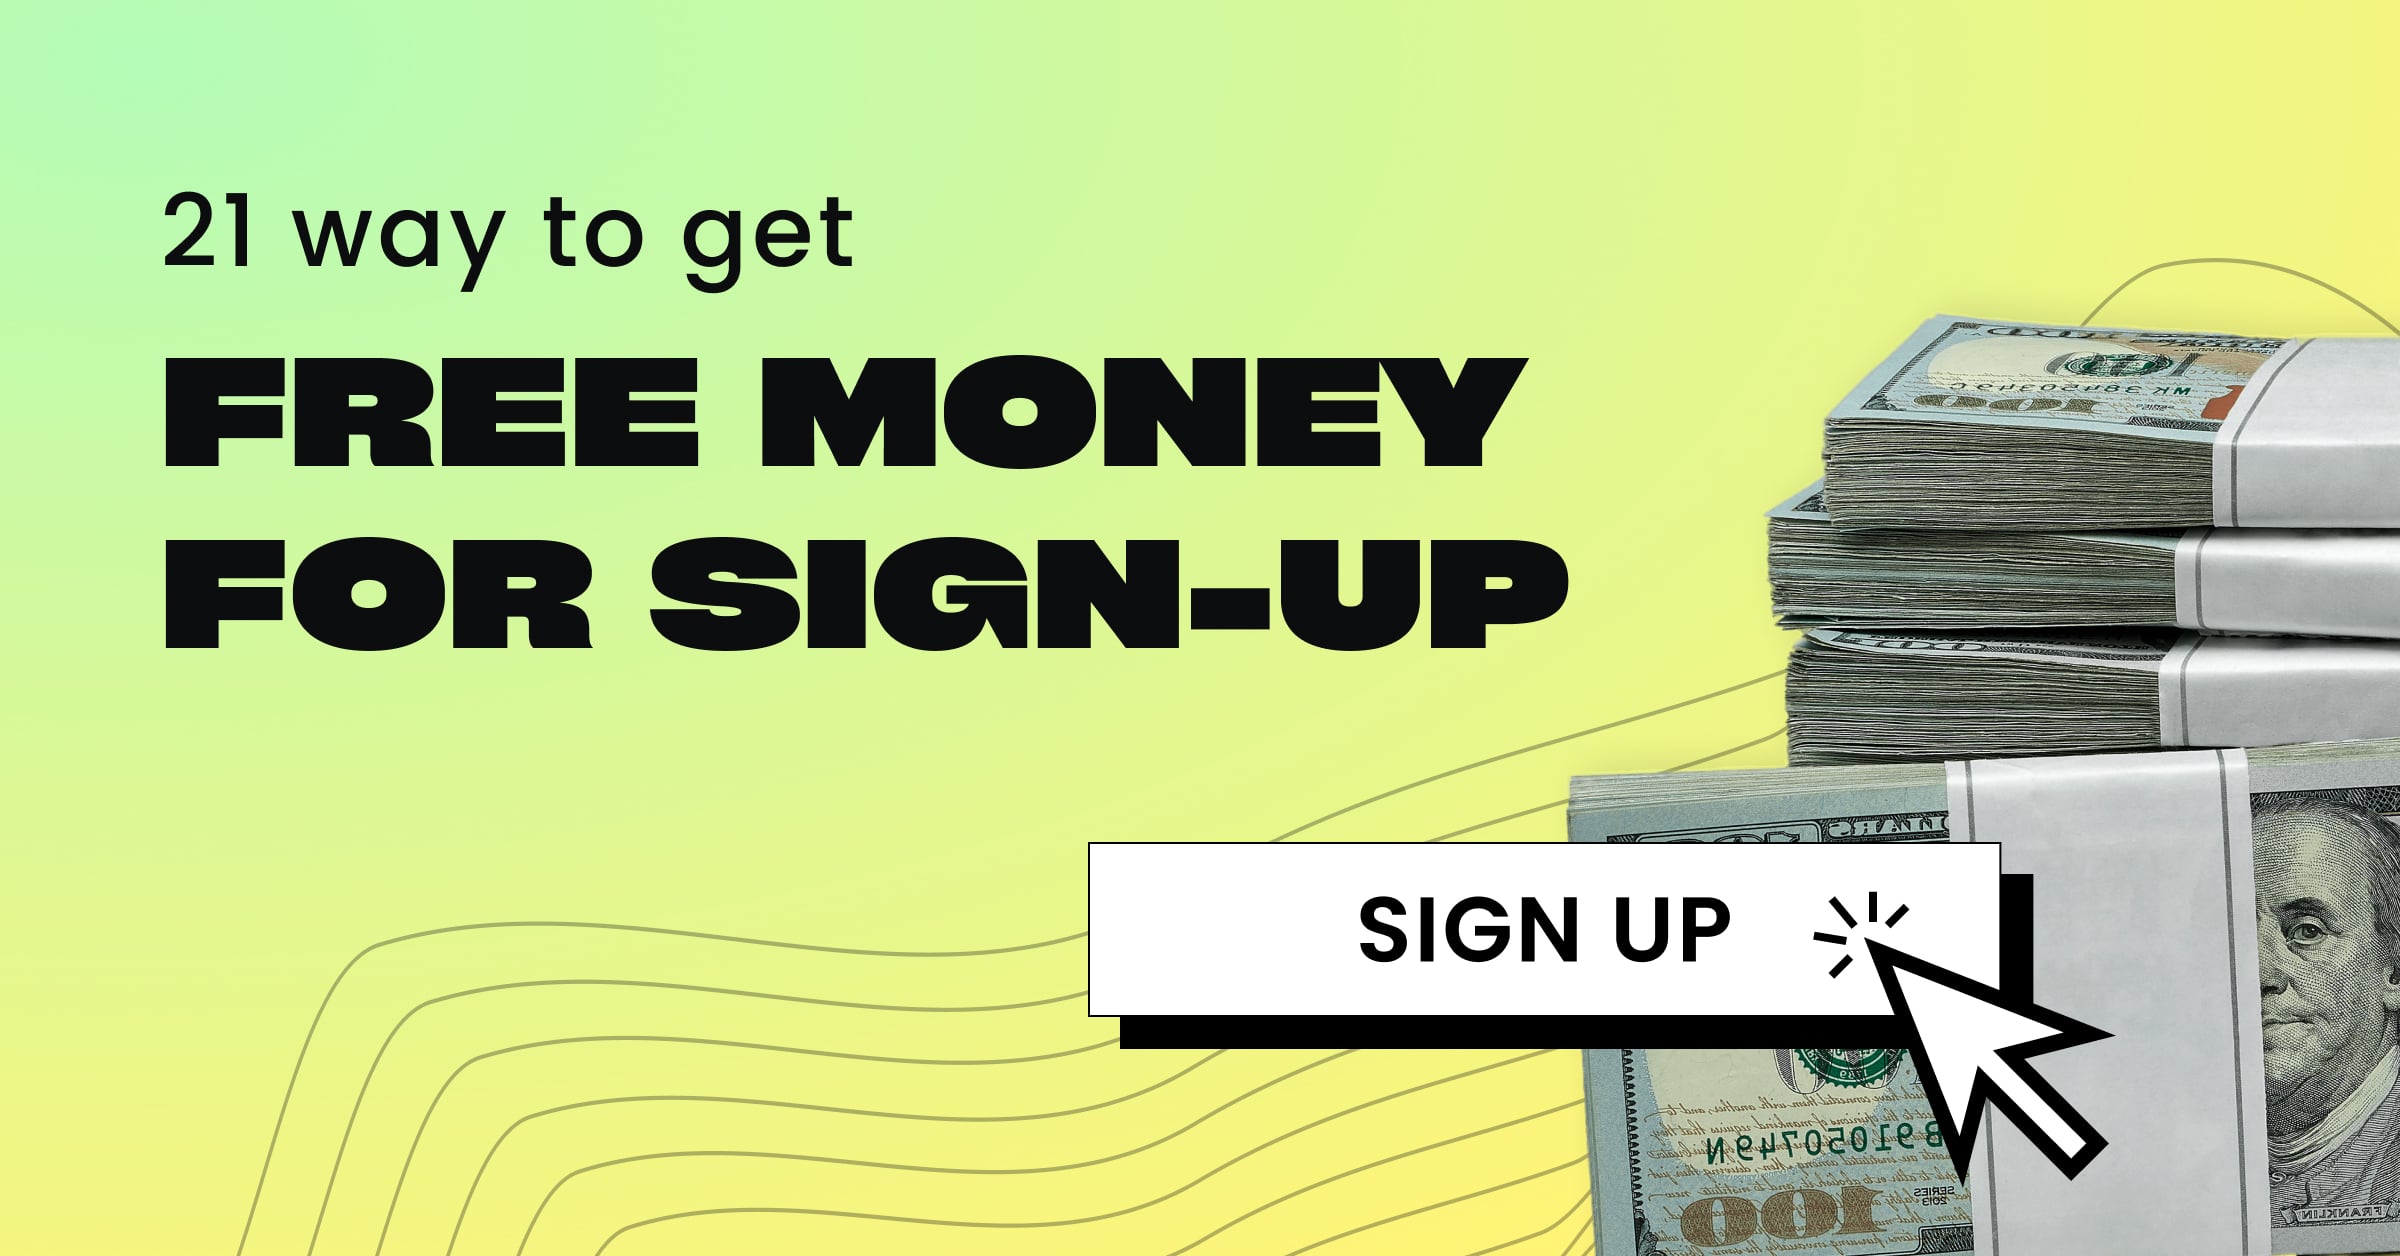 21 apps that give free money for signing up